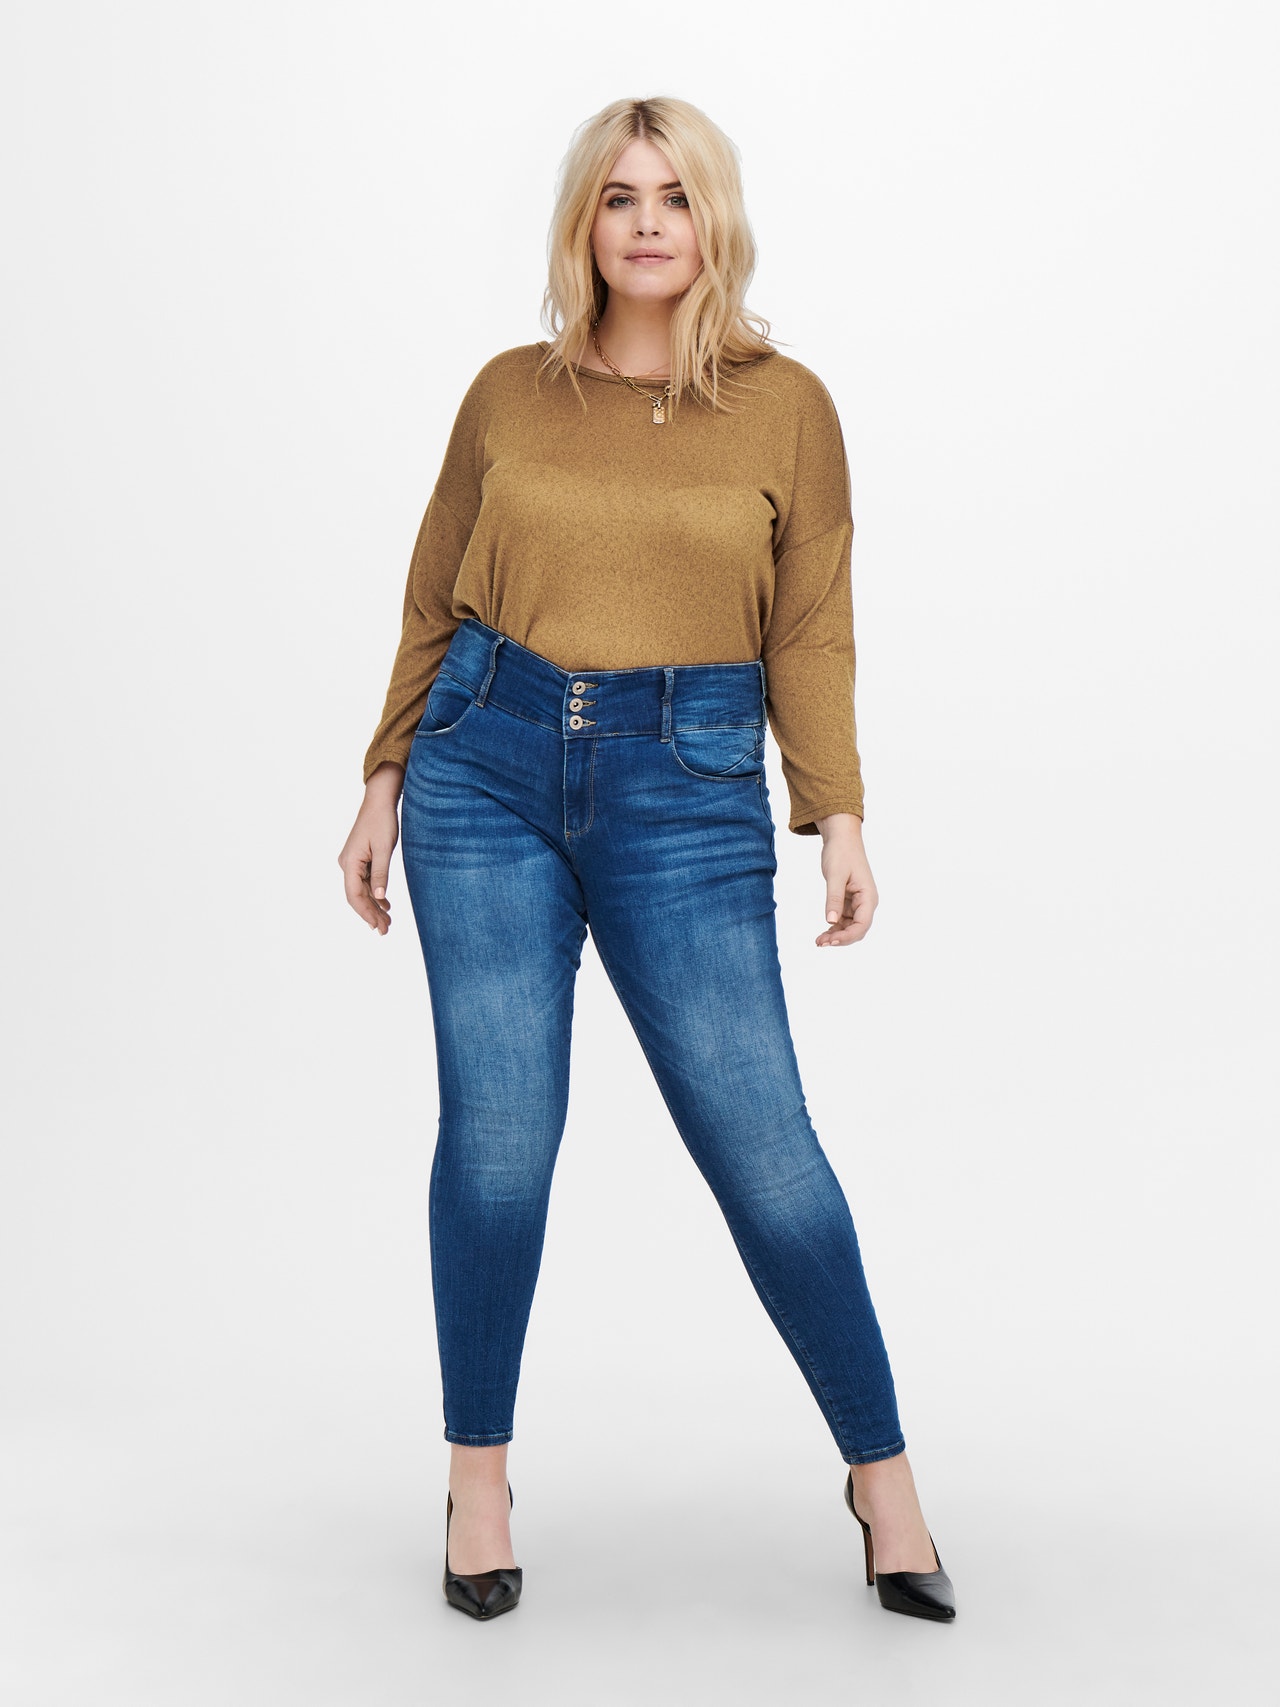 ONLY Curvy solid colored Top -Toasted Coconut - 15246678